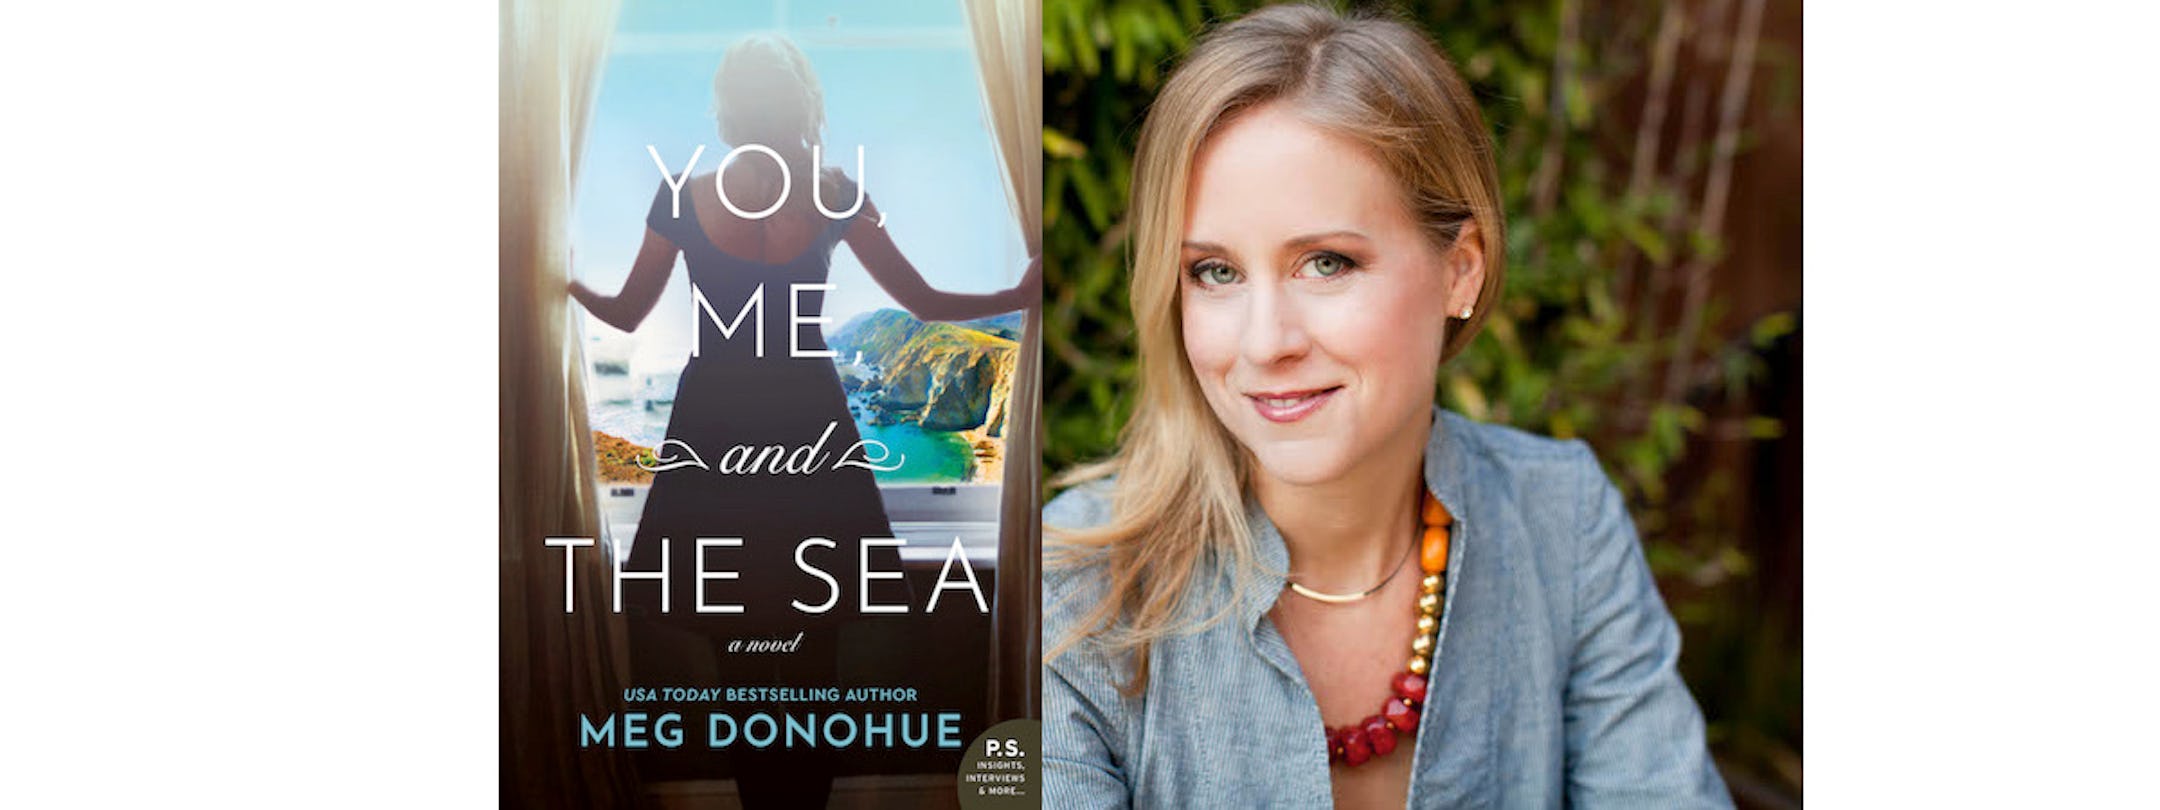 Book Excerpt: A Young Woman Grapples With ‘You, Me, and the Sea’